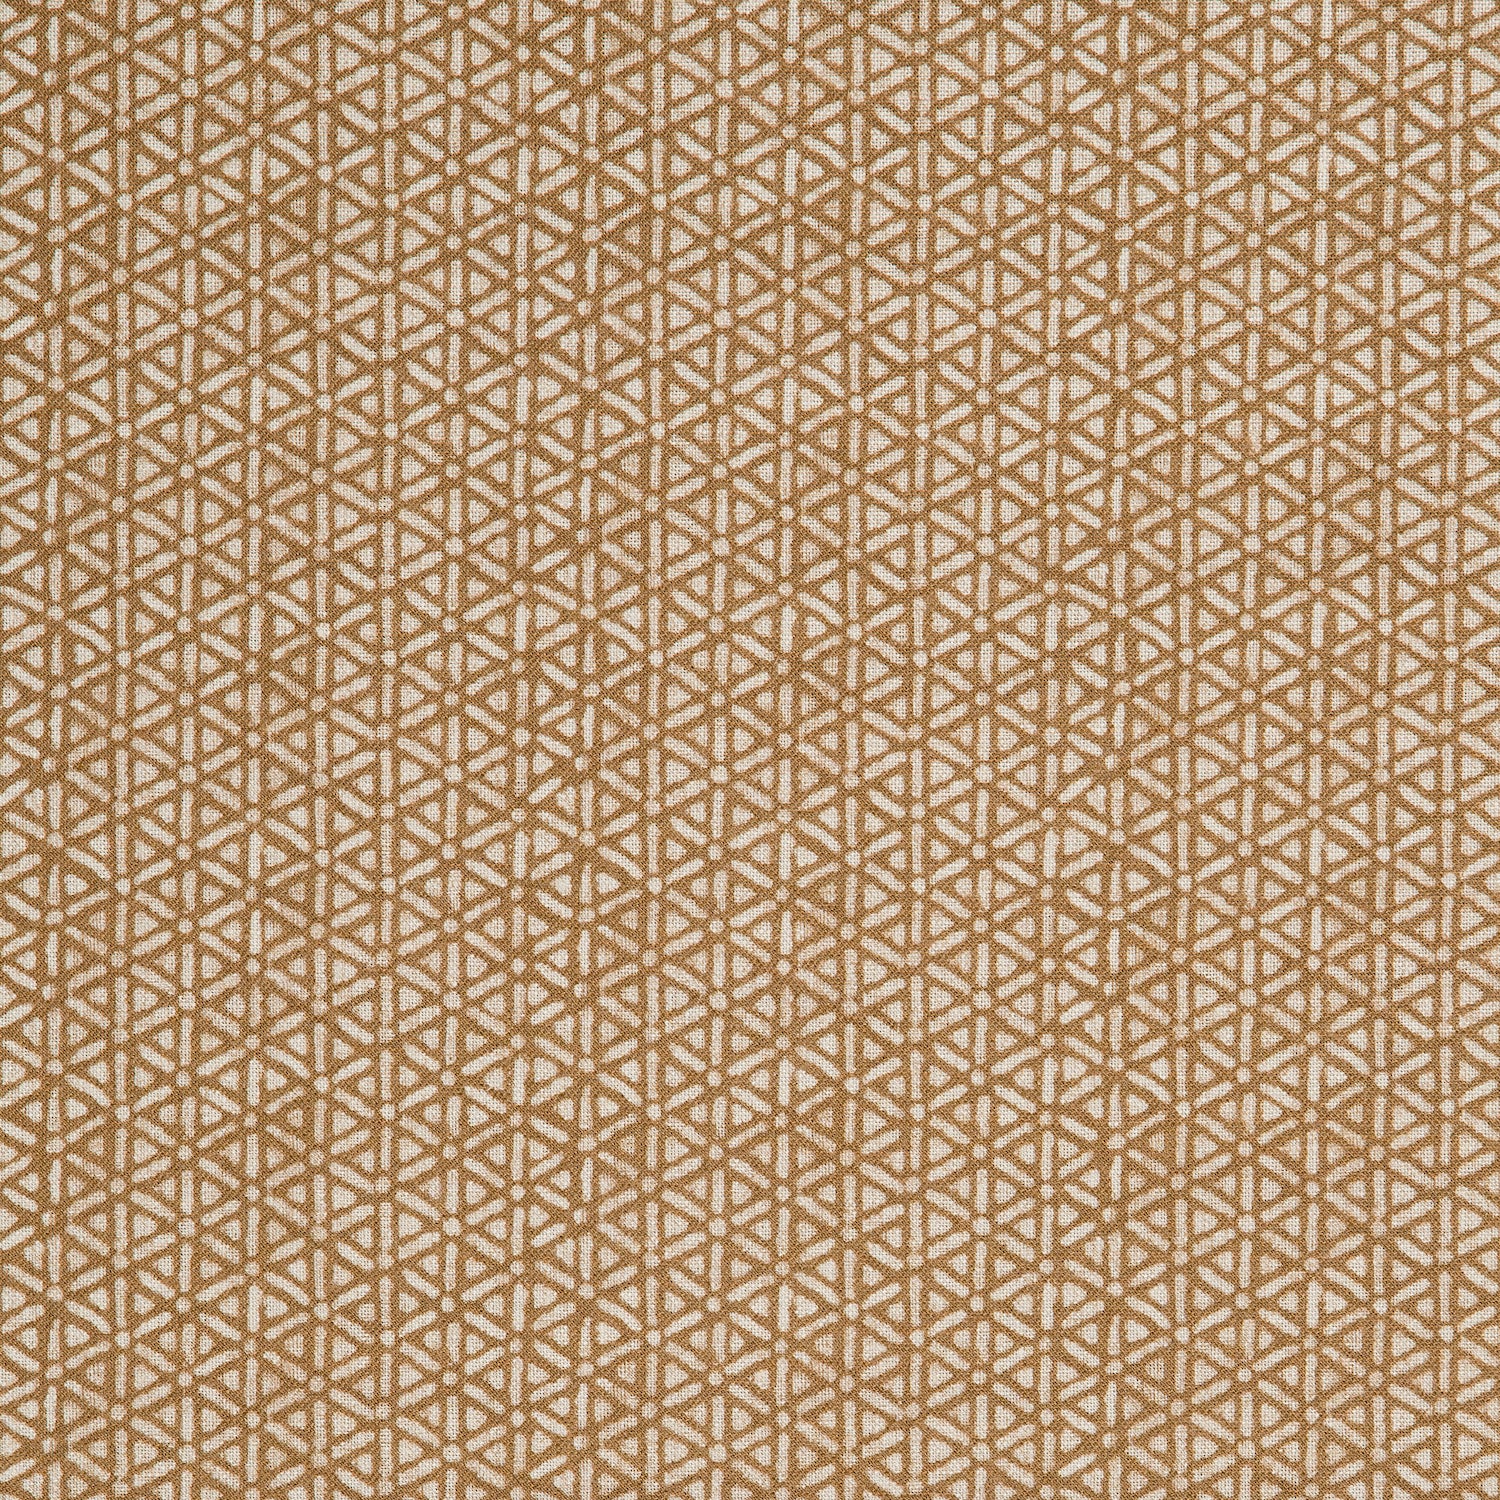 Detail of a linen fabric in a detailed geometric pattern in cream on a camel field.